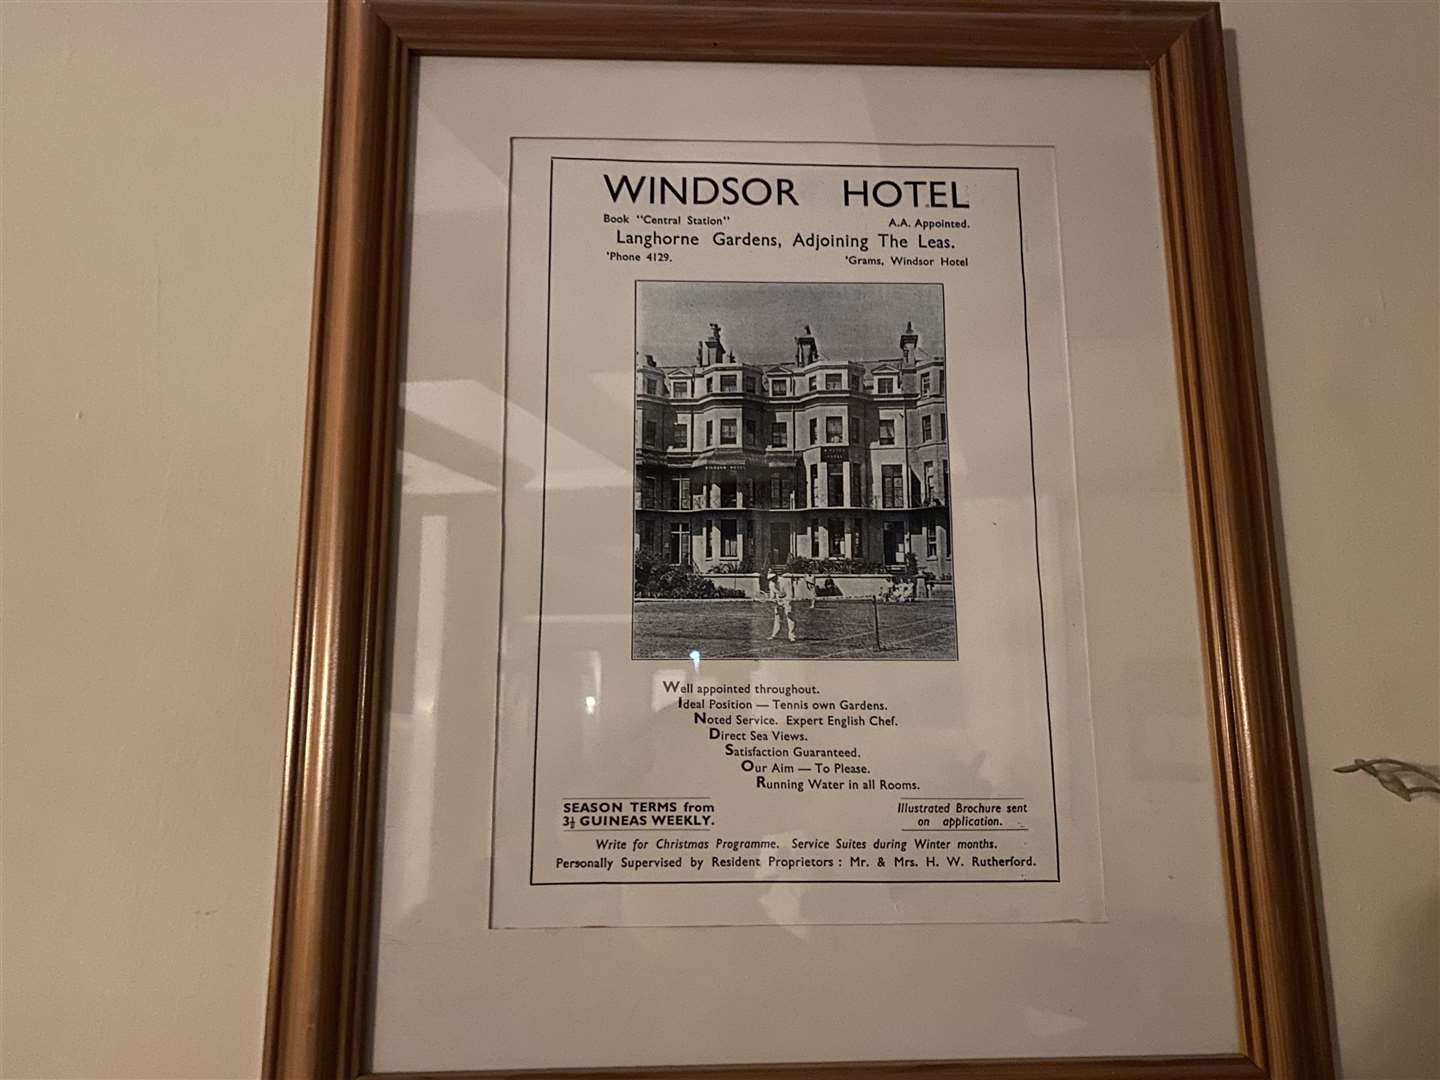 Celebrating the glory days of the past, this poster is the best thing about The Windsor Hotel